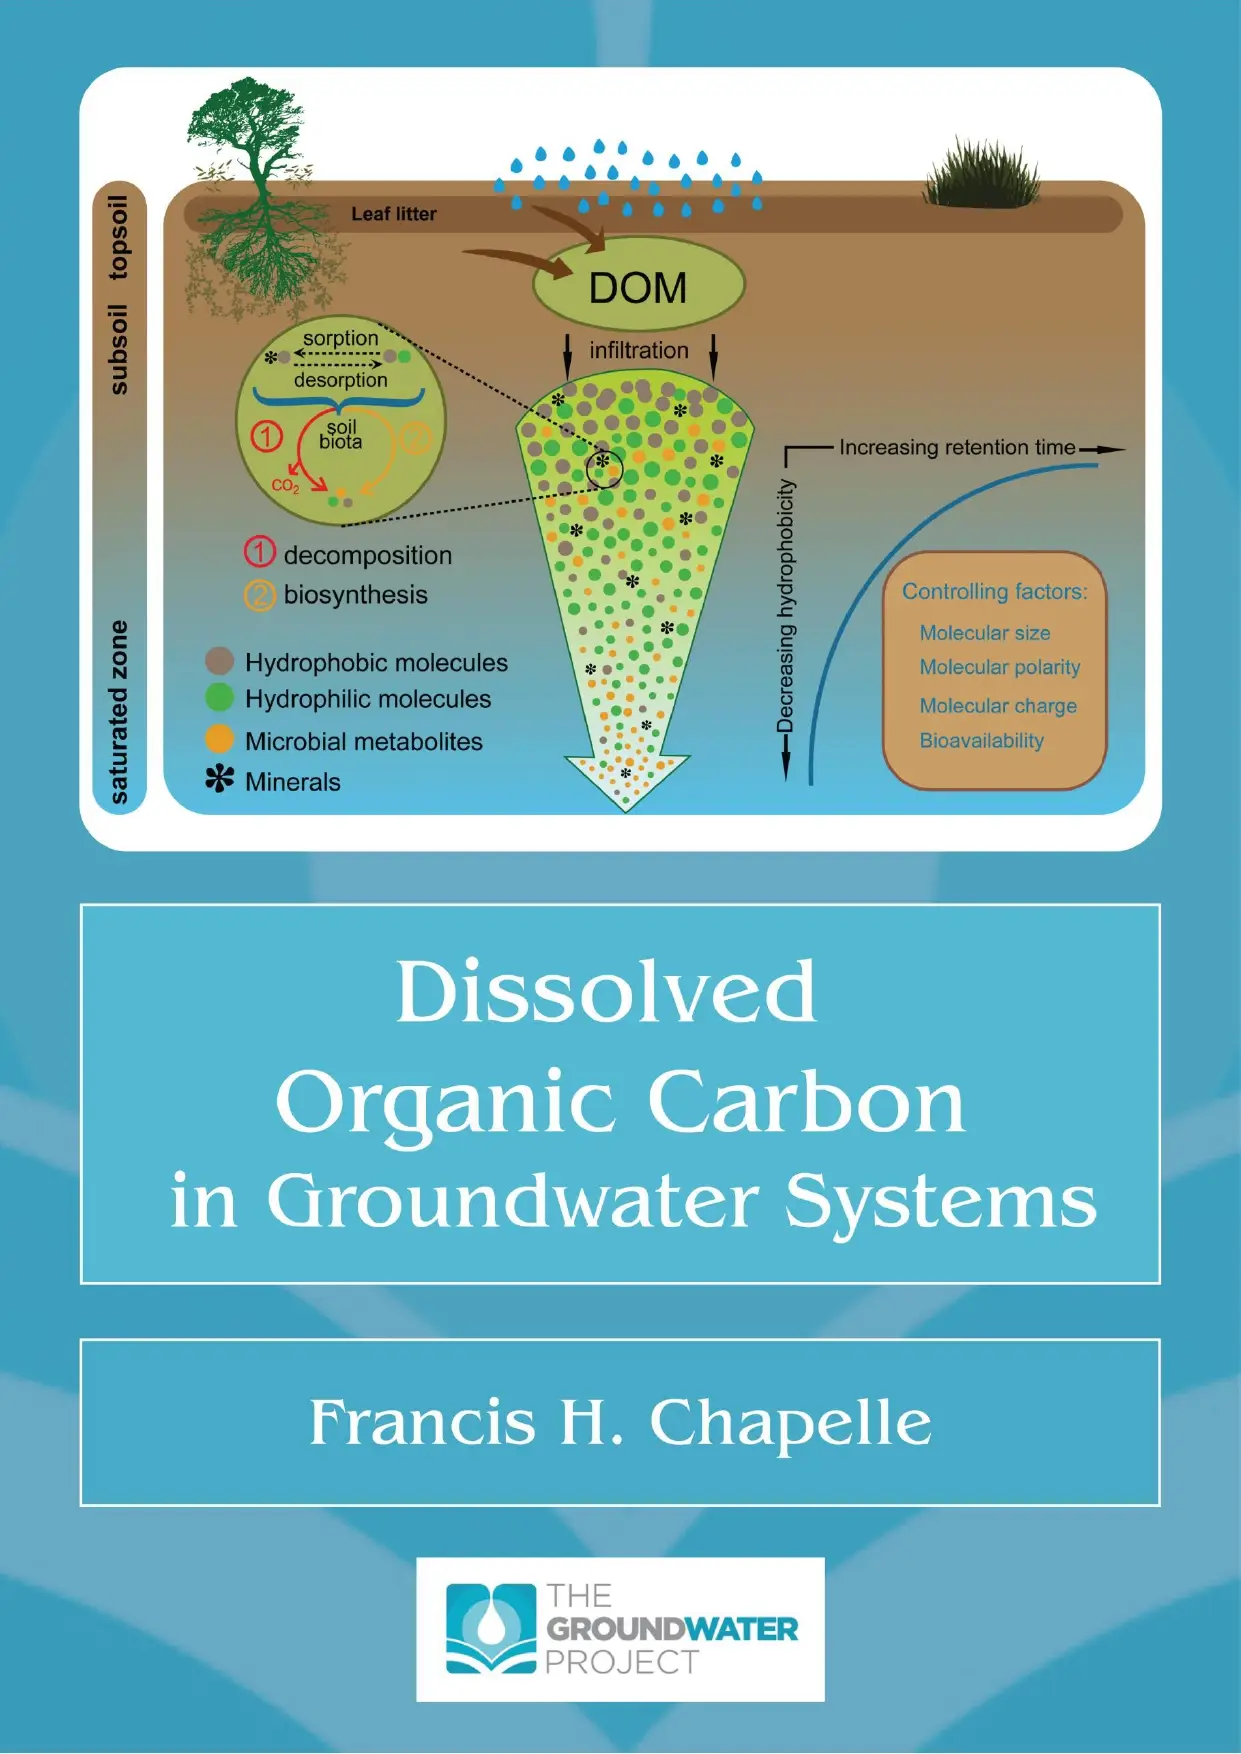 Dissolved Organic Carbon in Groundwater Systems